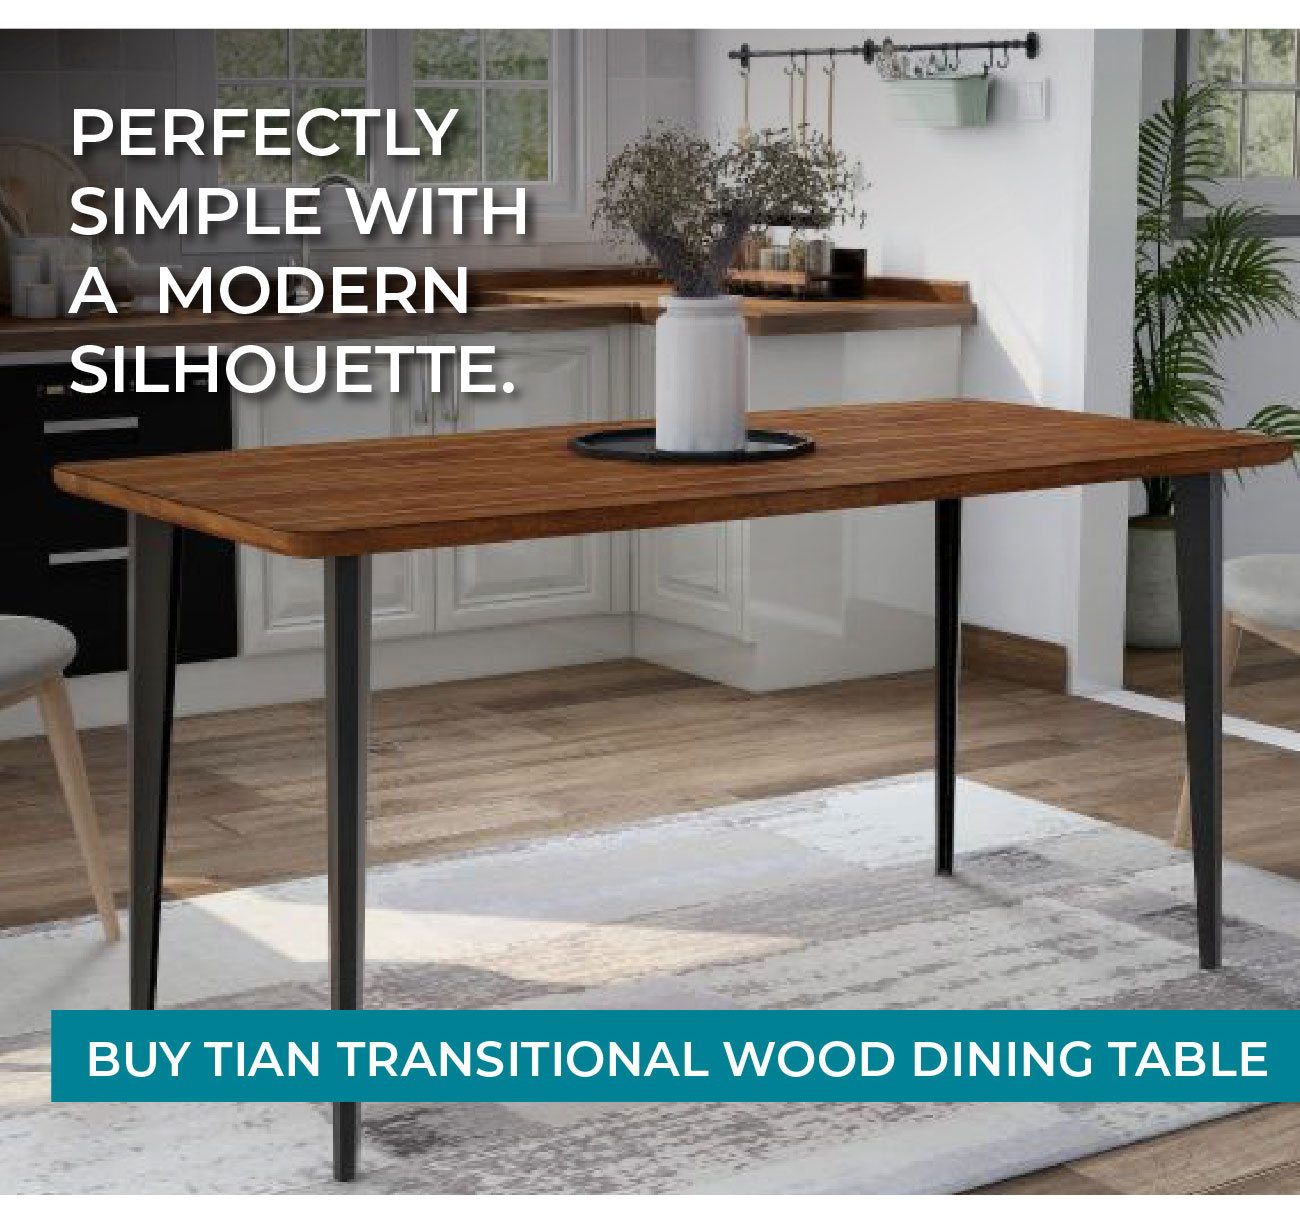 Tian Transitional Wood Dining Table